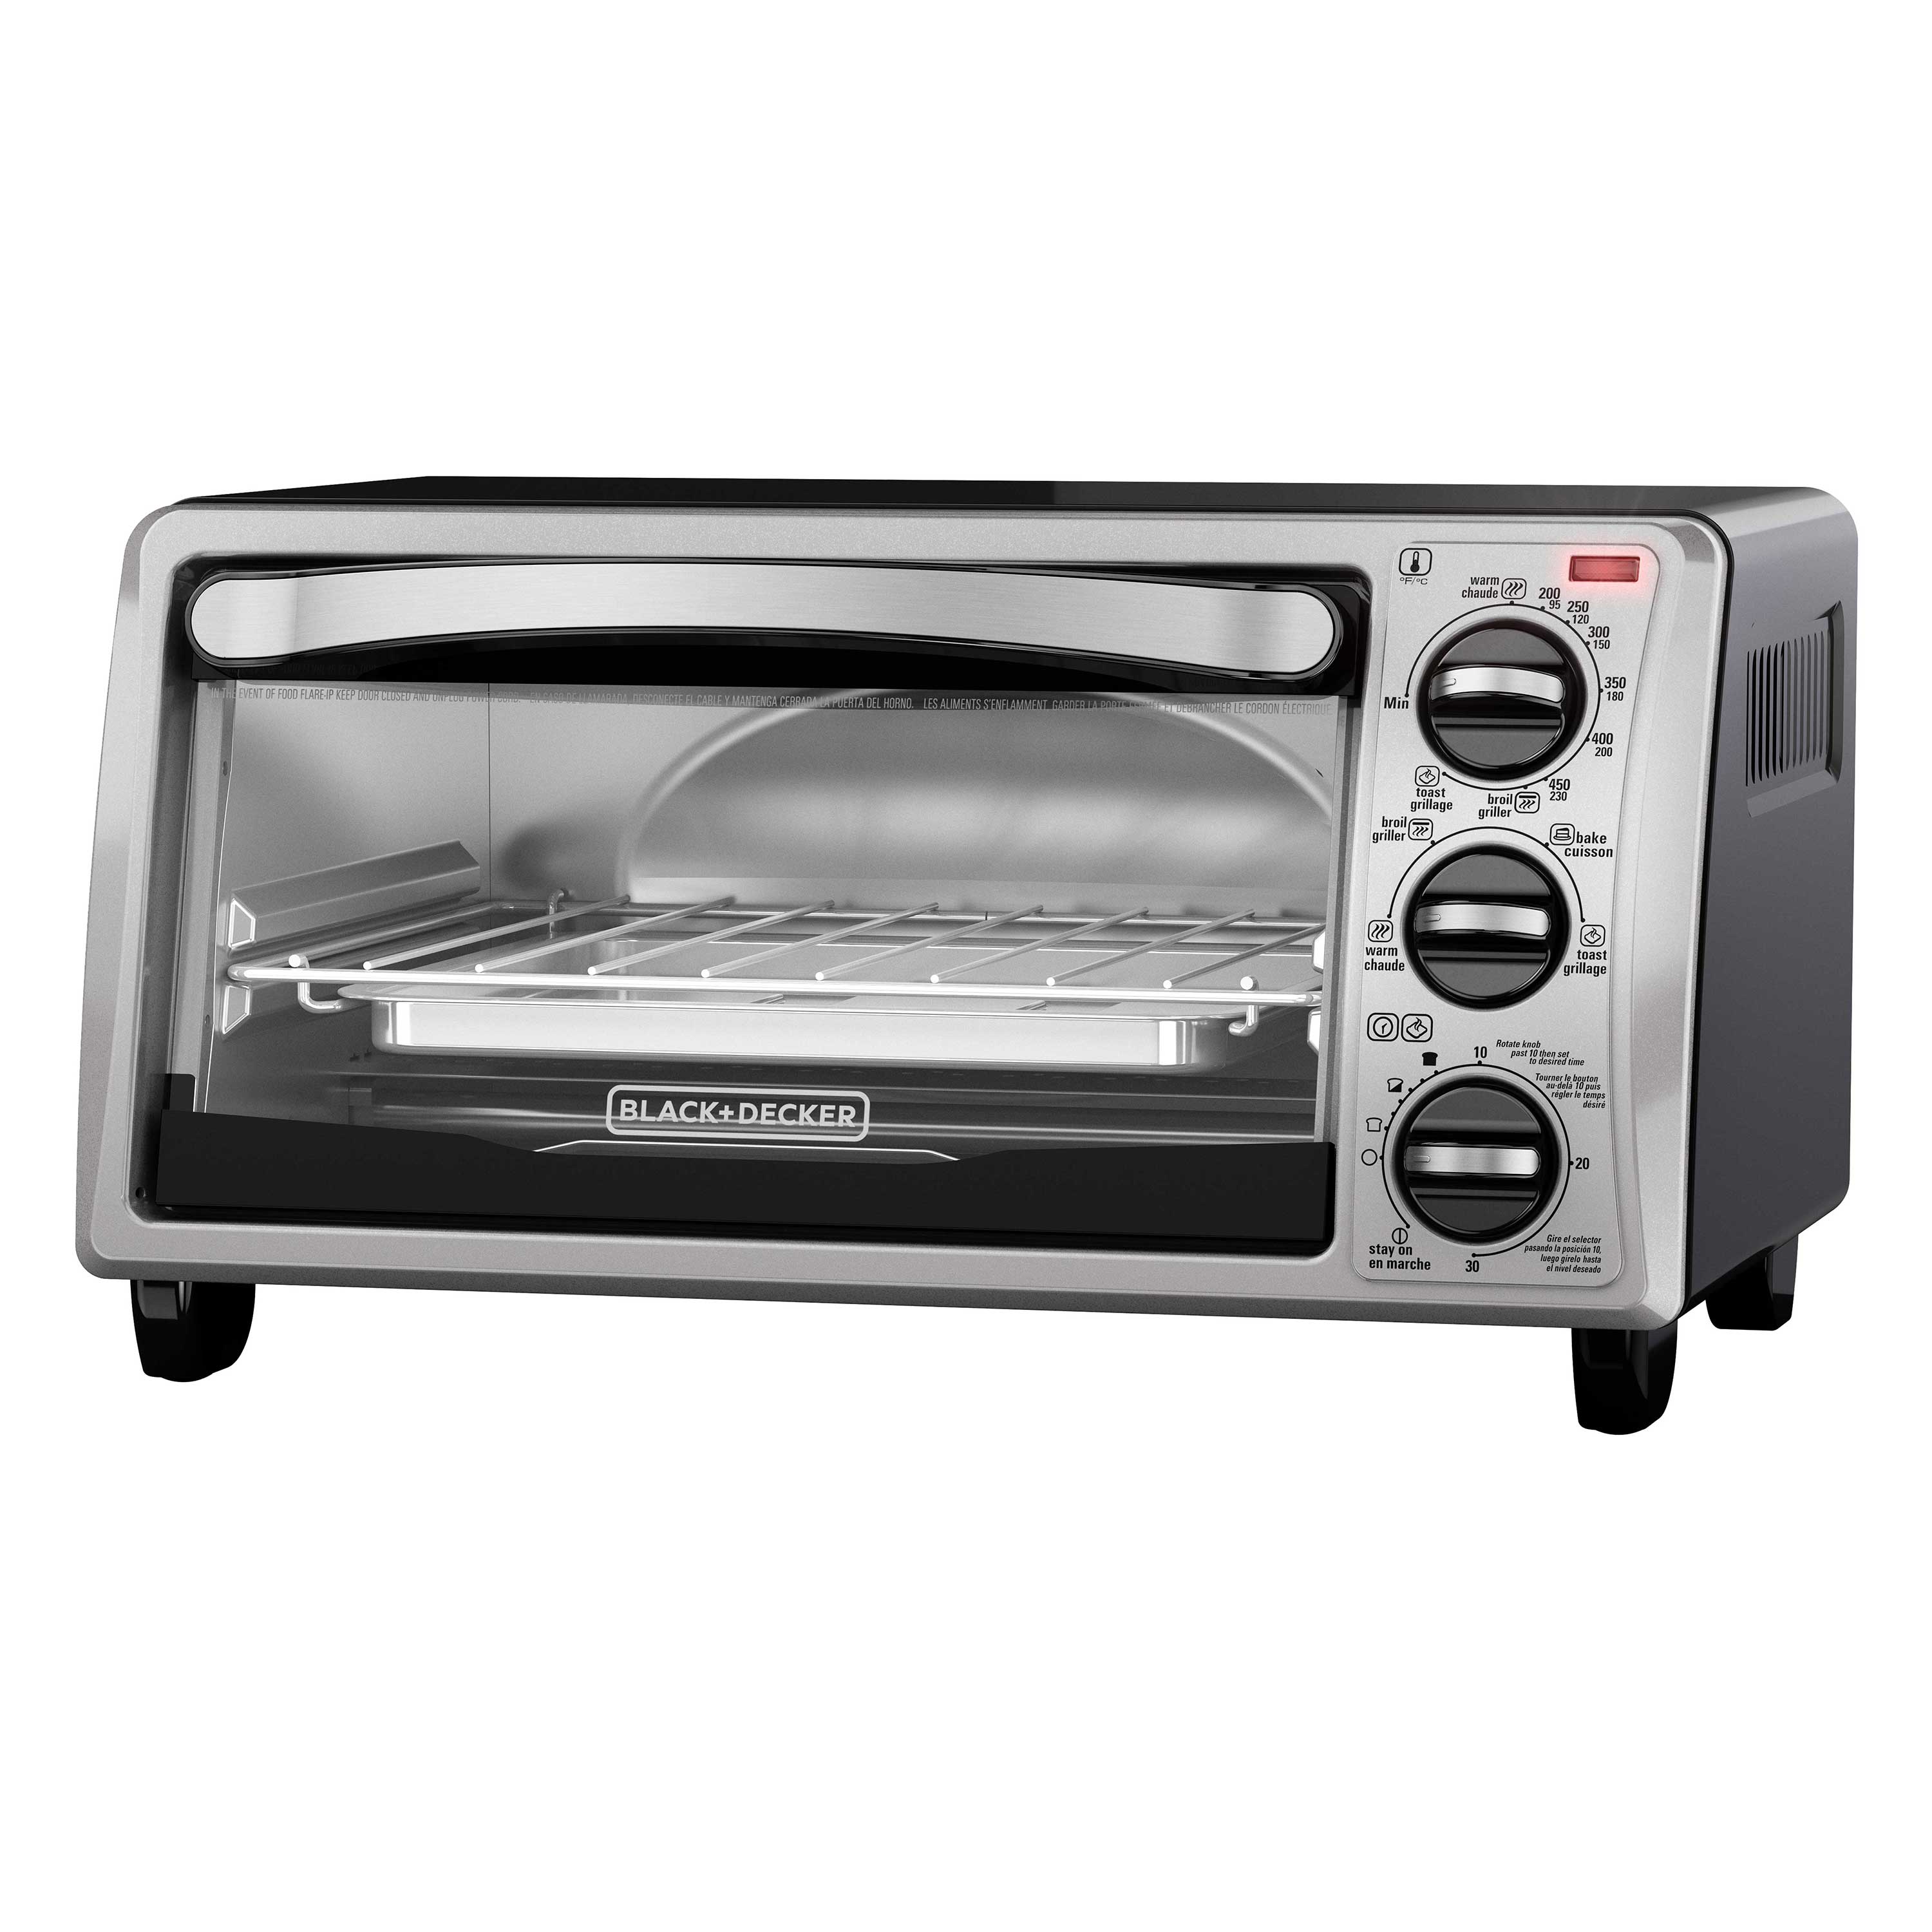 https://s7cdn.spectrumbrands.com/~/media/SmallAppliancesUS/Black%20and%20Decker/Product%20Page/cooking%20appliances/convection%20and%20toaster%20ovens/TO1313SBD/TO1313SBD_NS_Prd1_HR.jpg?h=3000&la=en&w=3000